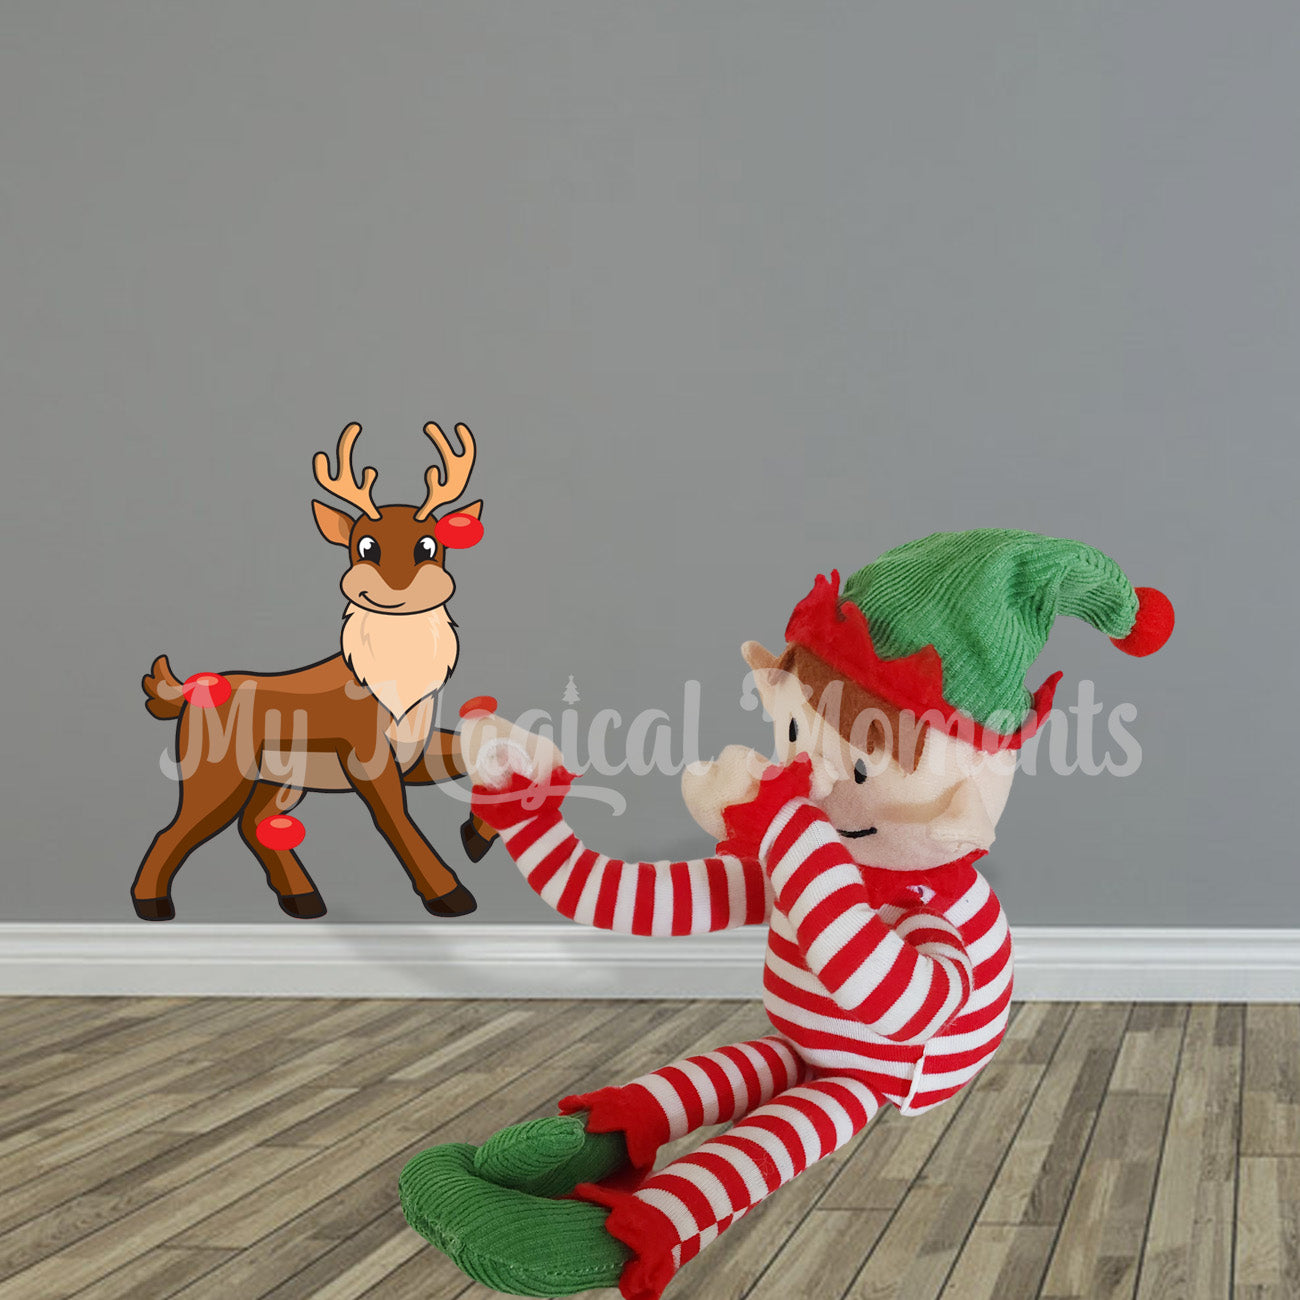 Elf for Christmas playing pin the nose game